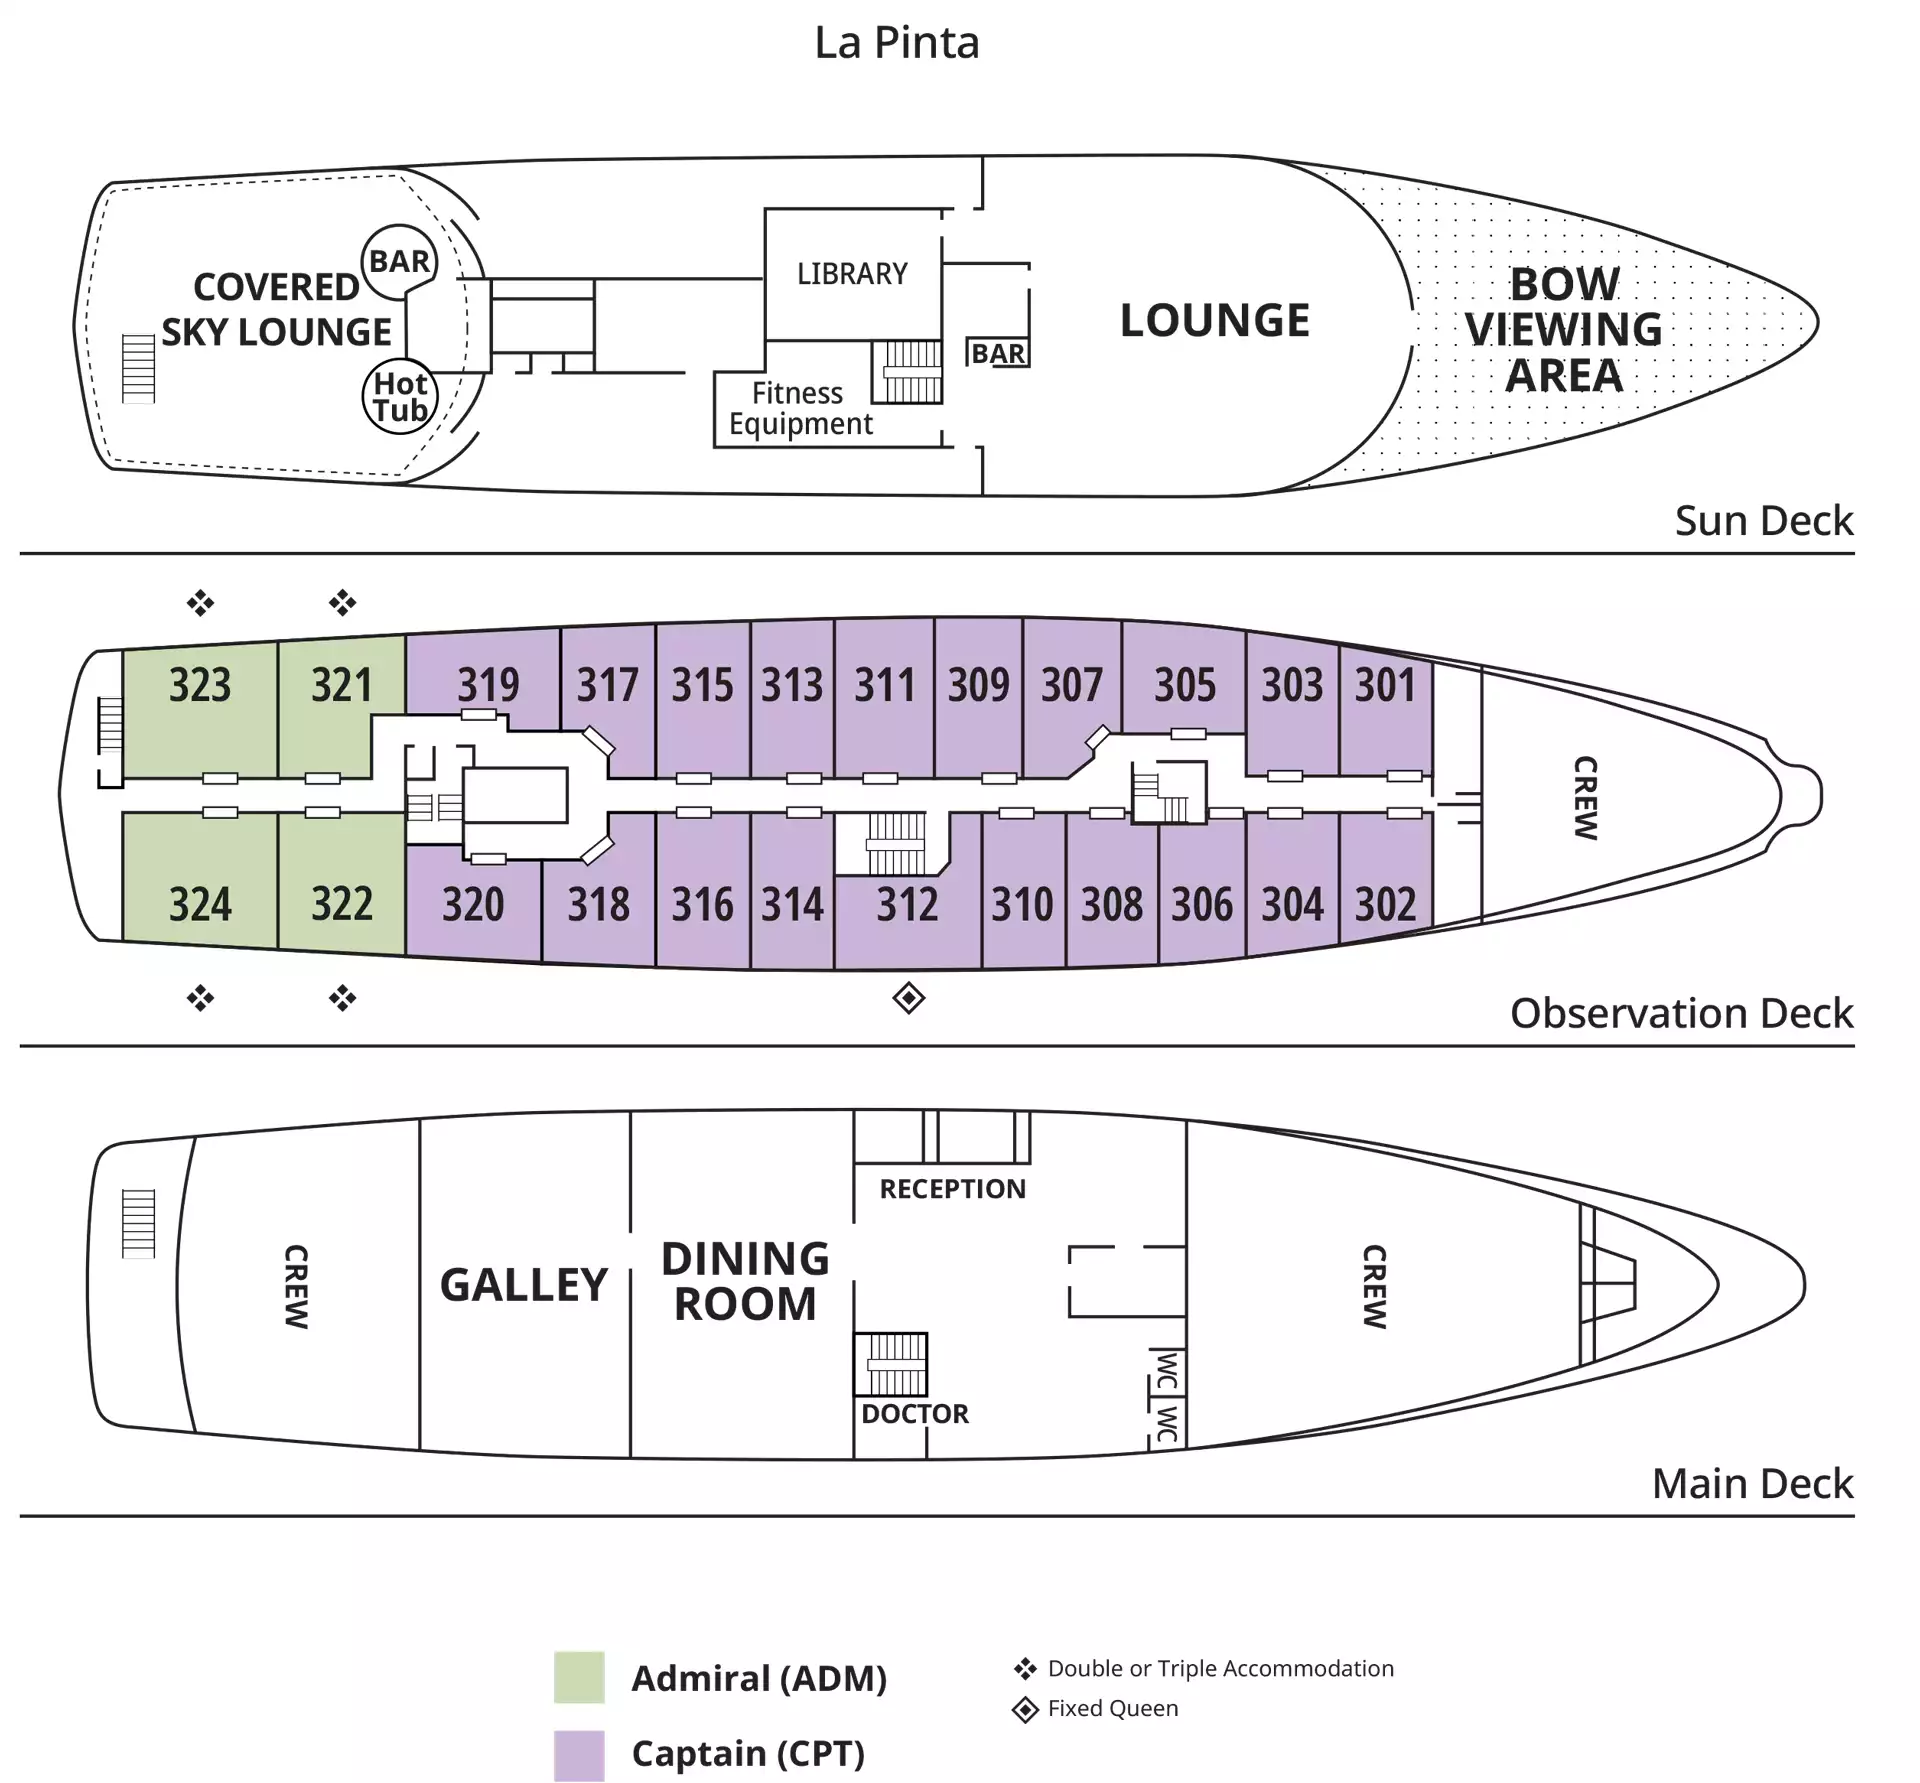 Deck plan for UnCruise La Pinta ship showing Admiral Cabins in green & Captain cabins in purple.